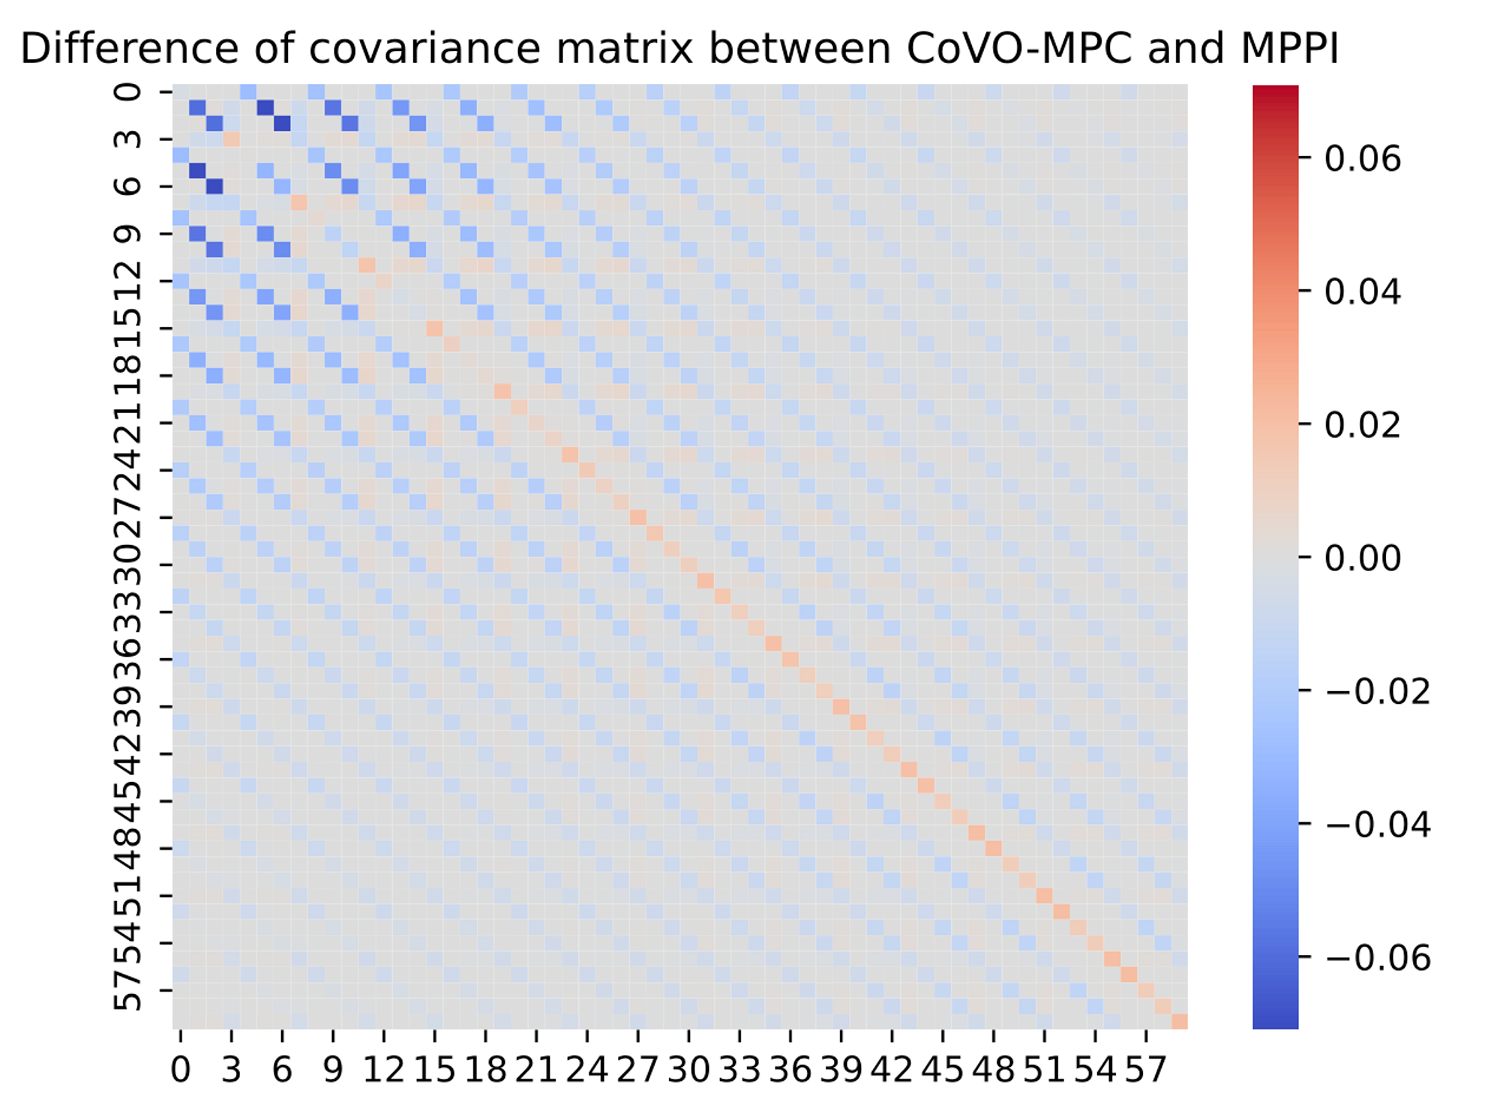 Difference between covariance matrix optimized by CoVO v.s. MPPI